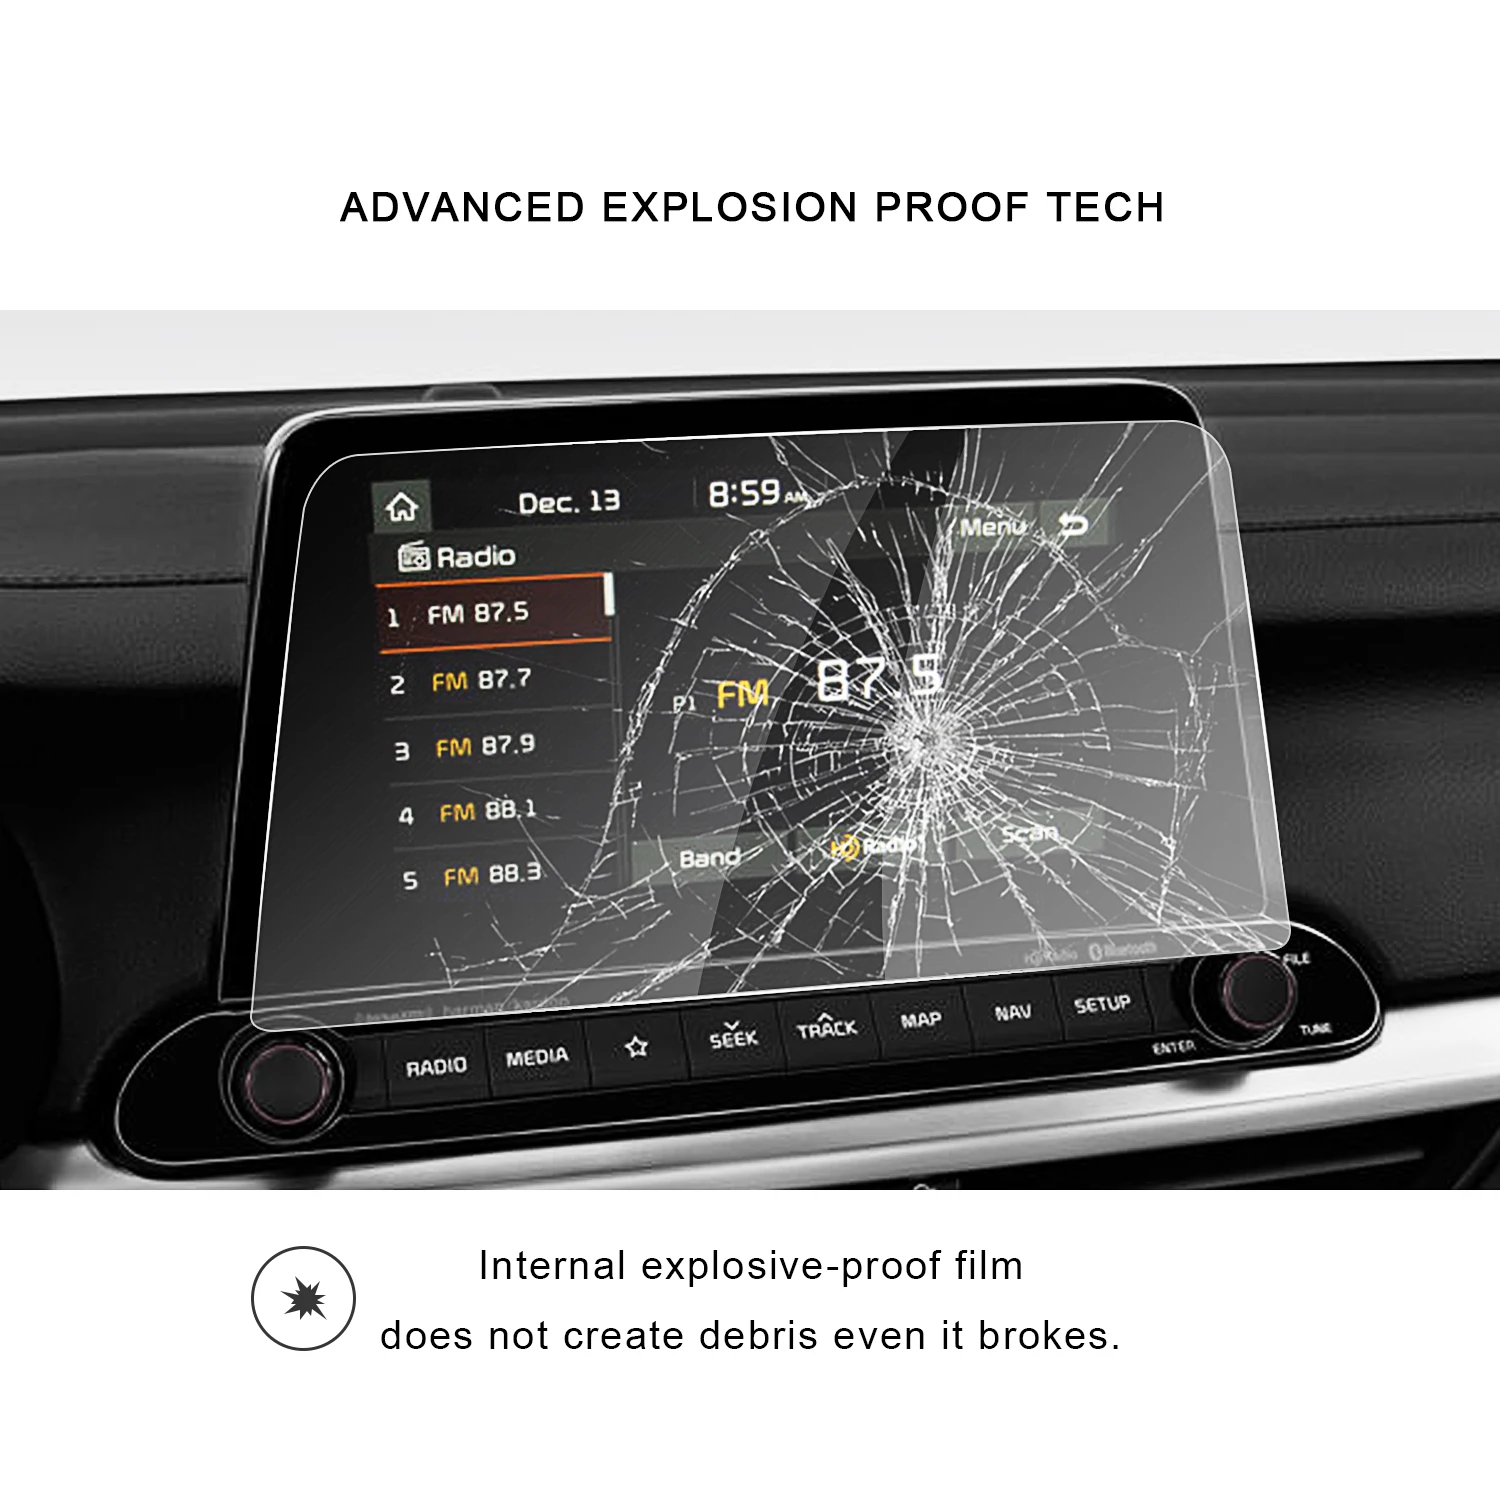 ruiya for fortestinger 2019 8 inch car navigation touch display screen protector auto interior accessories tempered glass film free global shipping